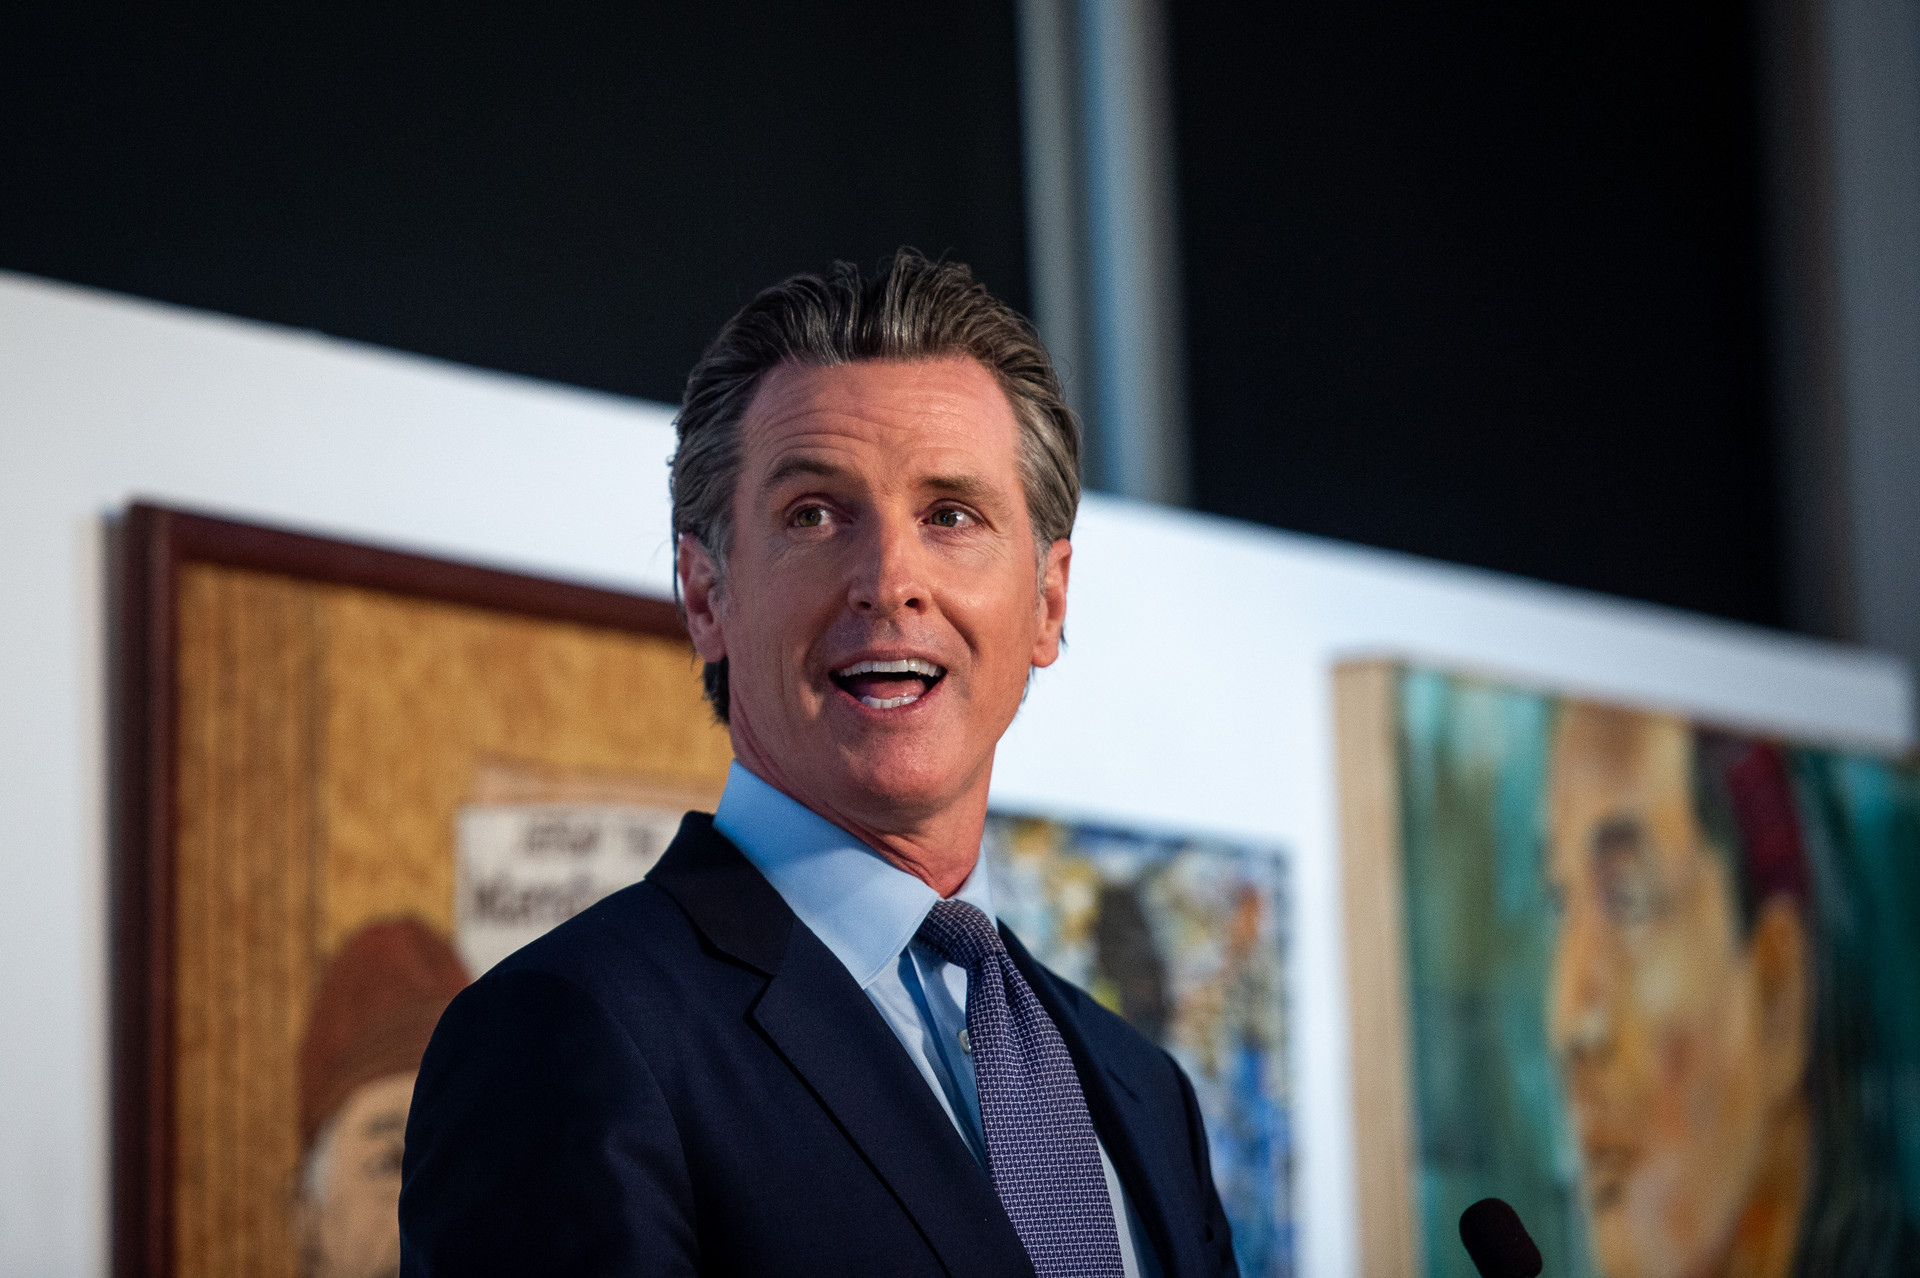 A middle-aged white man is looking off to his right shoulder in a room full of large paintings that hang on white walls. He wears a navy suit and tie with his salt and pepper hair slicked back.